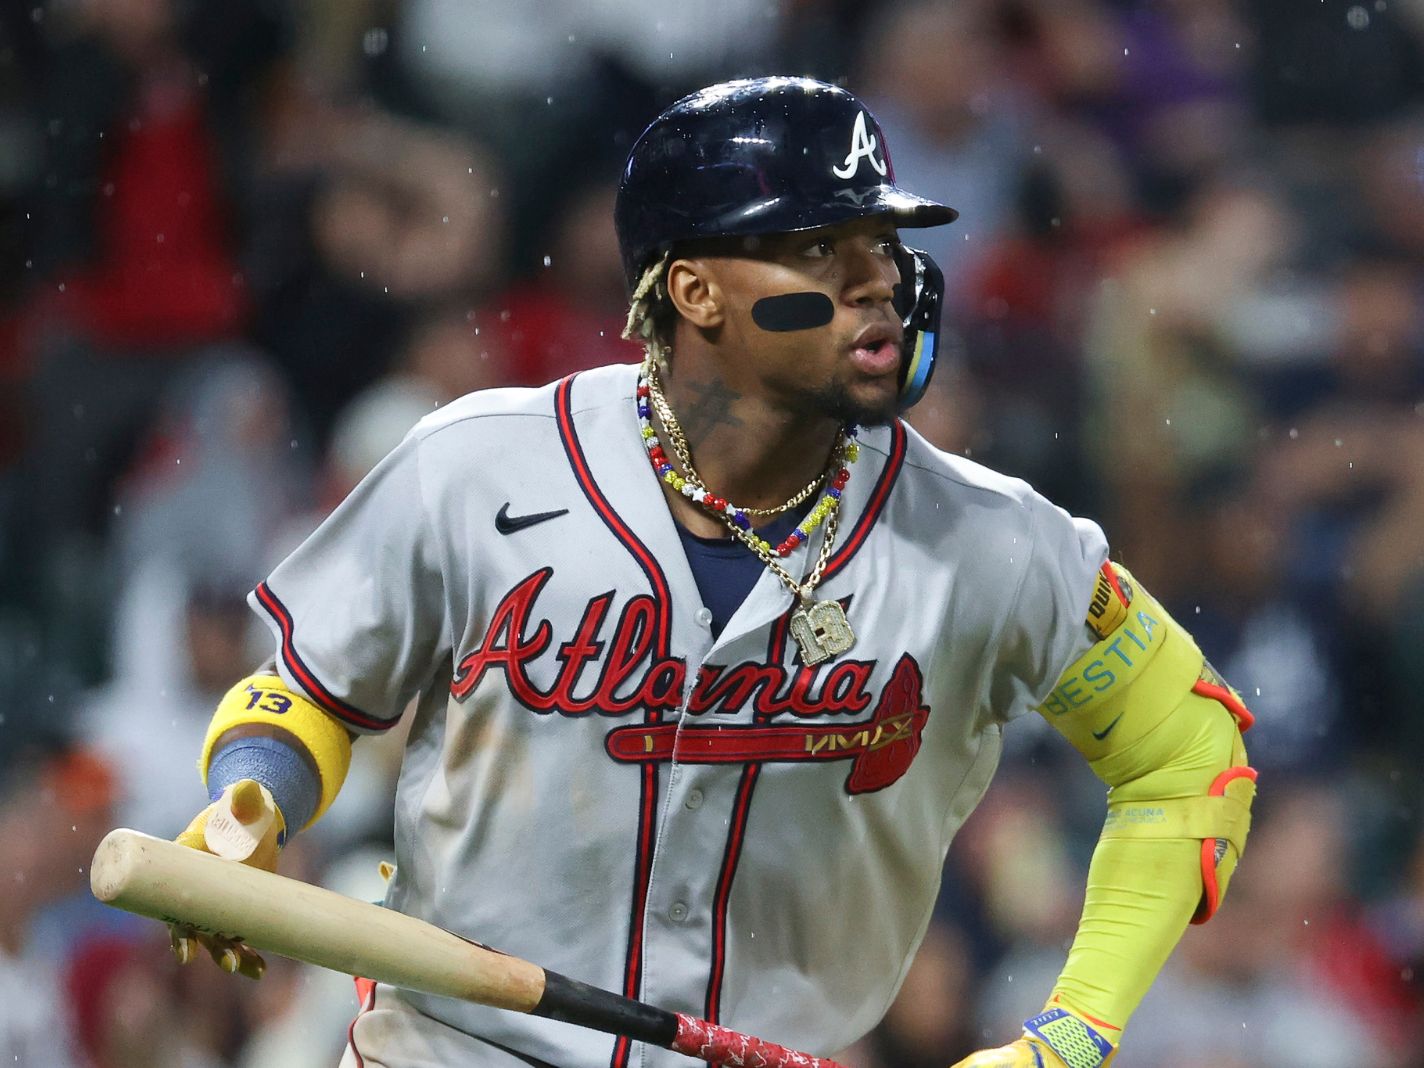 WATCH: Ronald Acuña Jr. Knocked To Ground by Fans Who Stormed